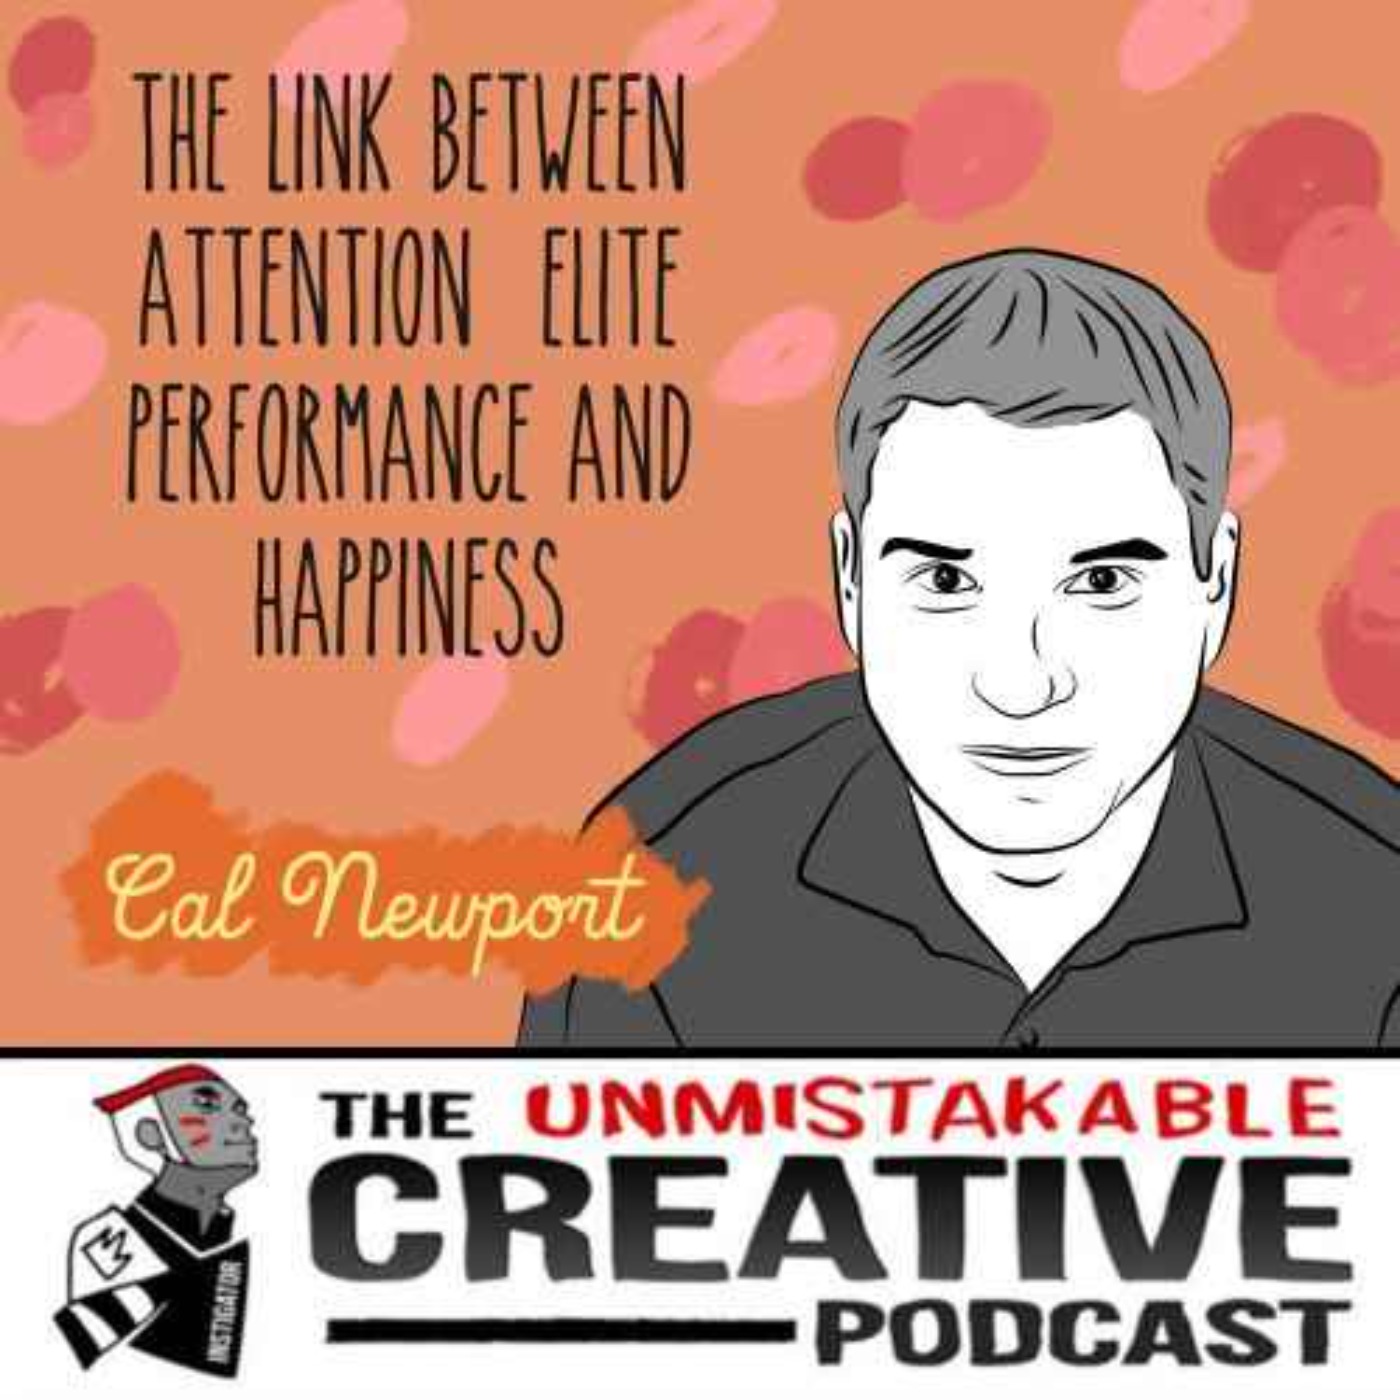 The Knowledge Management Series: Cal Newport | The Link Between Attention, Elite Performance and Happiness Image